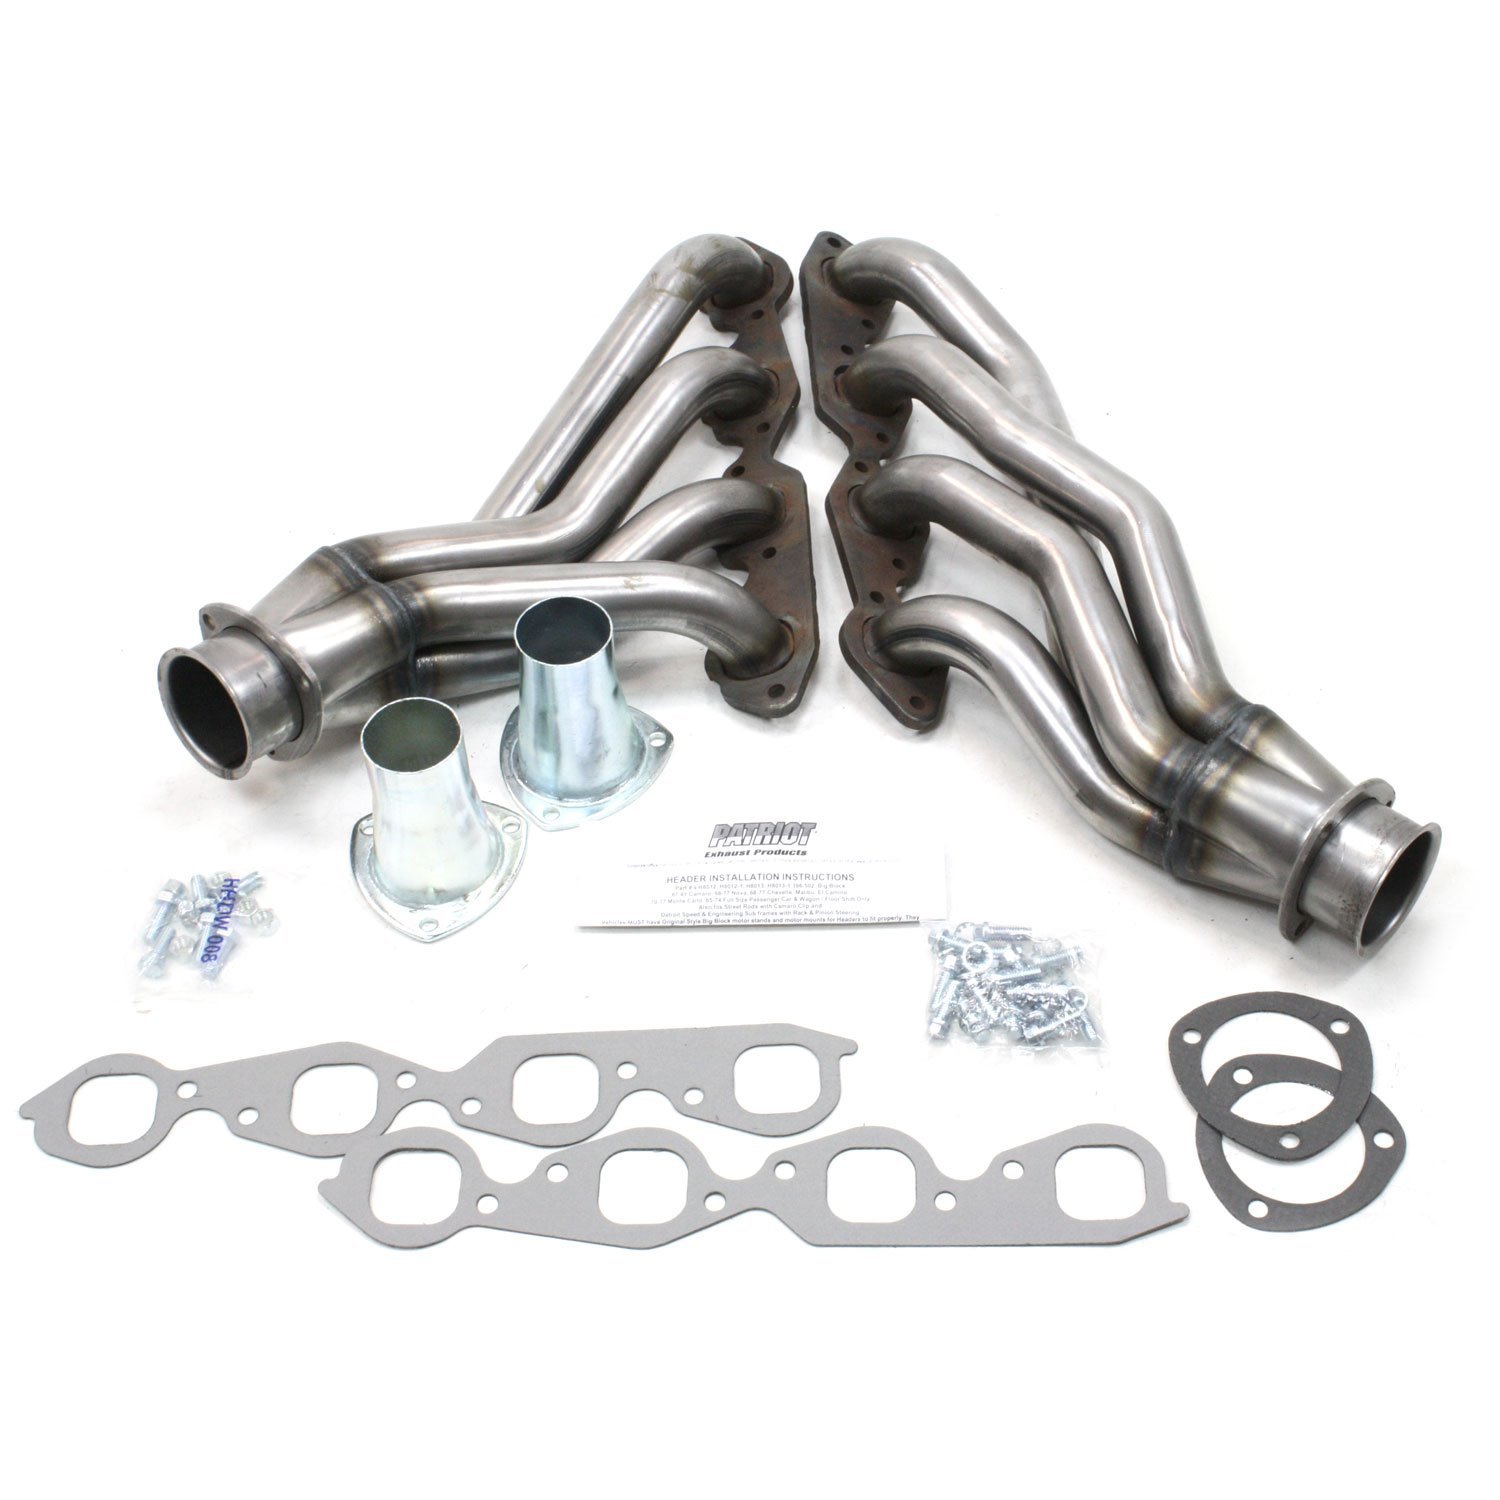 GM Specific Fit Headers 1965-1974 Full Size Passenger Car